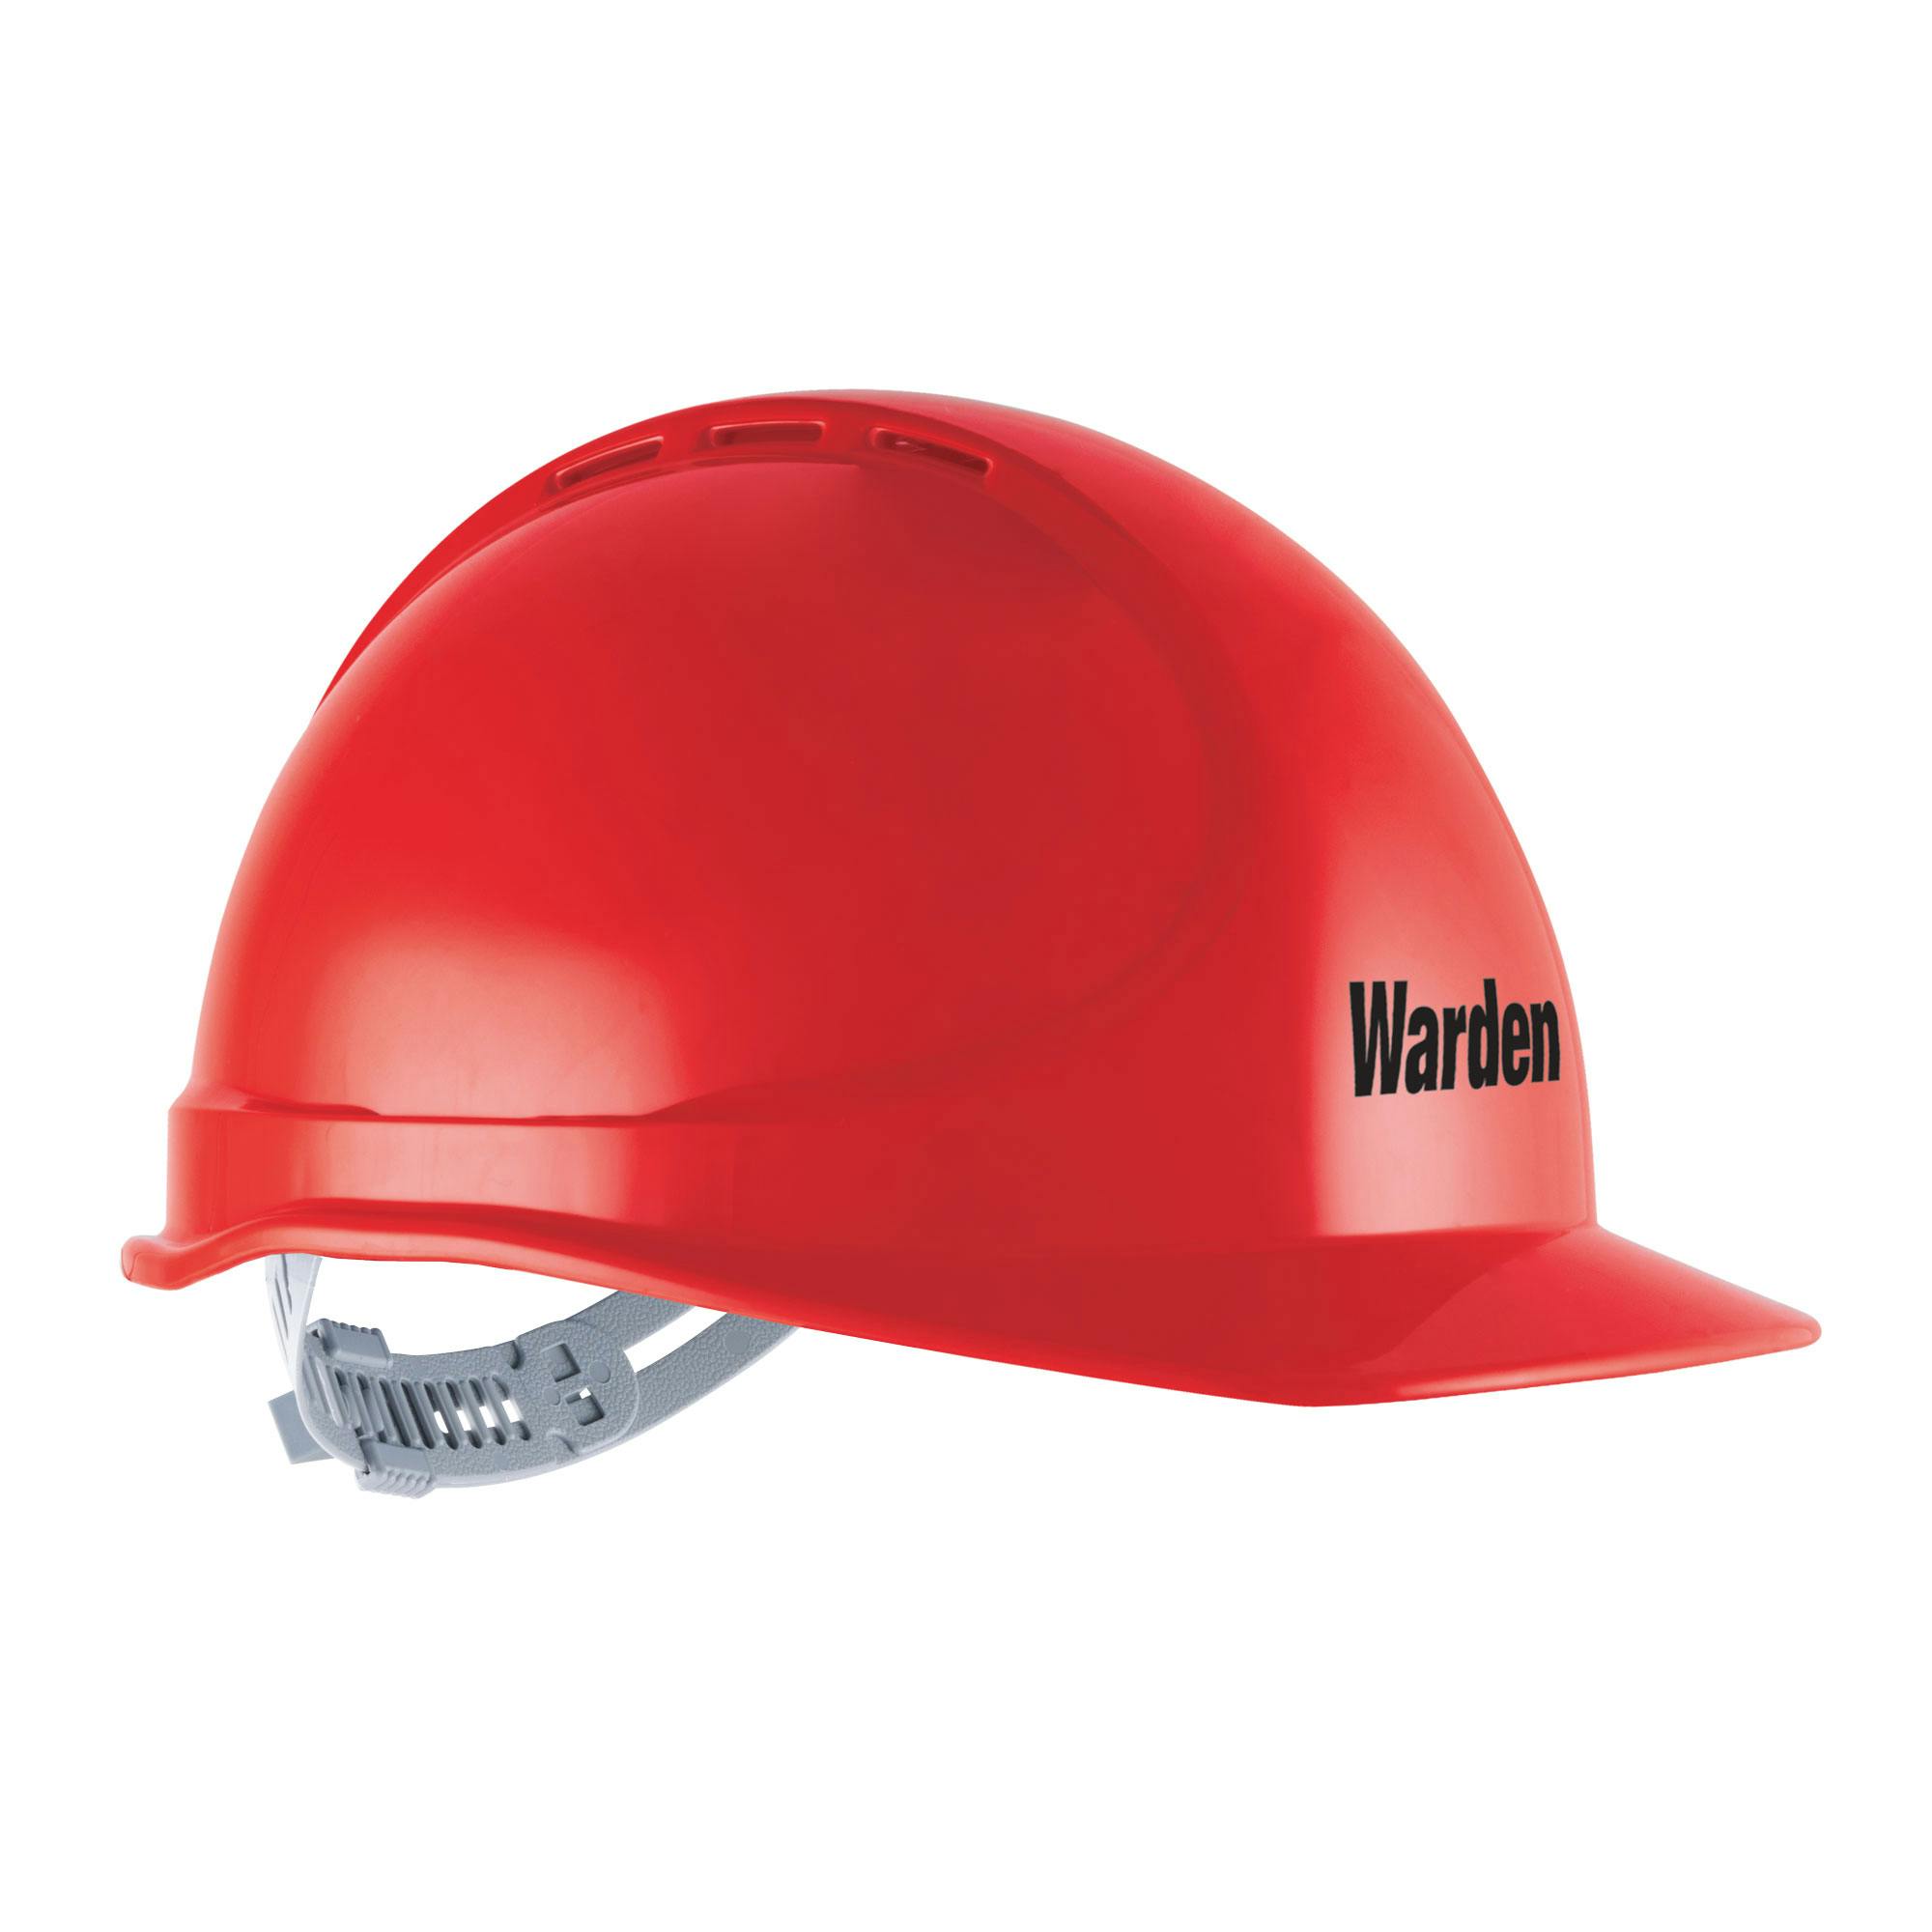 Force360 GTE3 ABS Vented Hard Hat With Slide Lock Harness, Type1_6